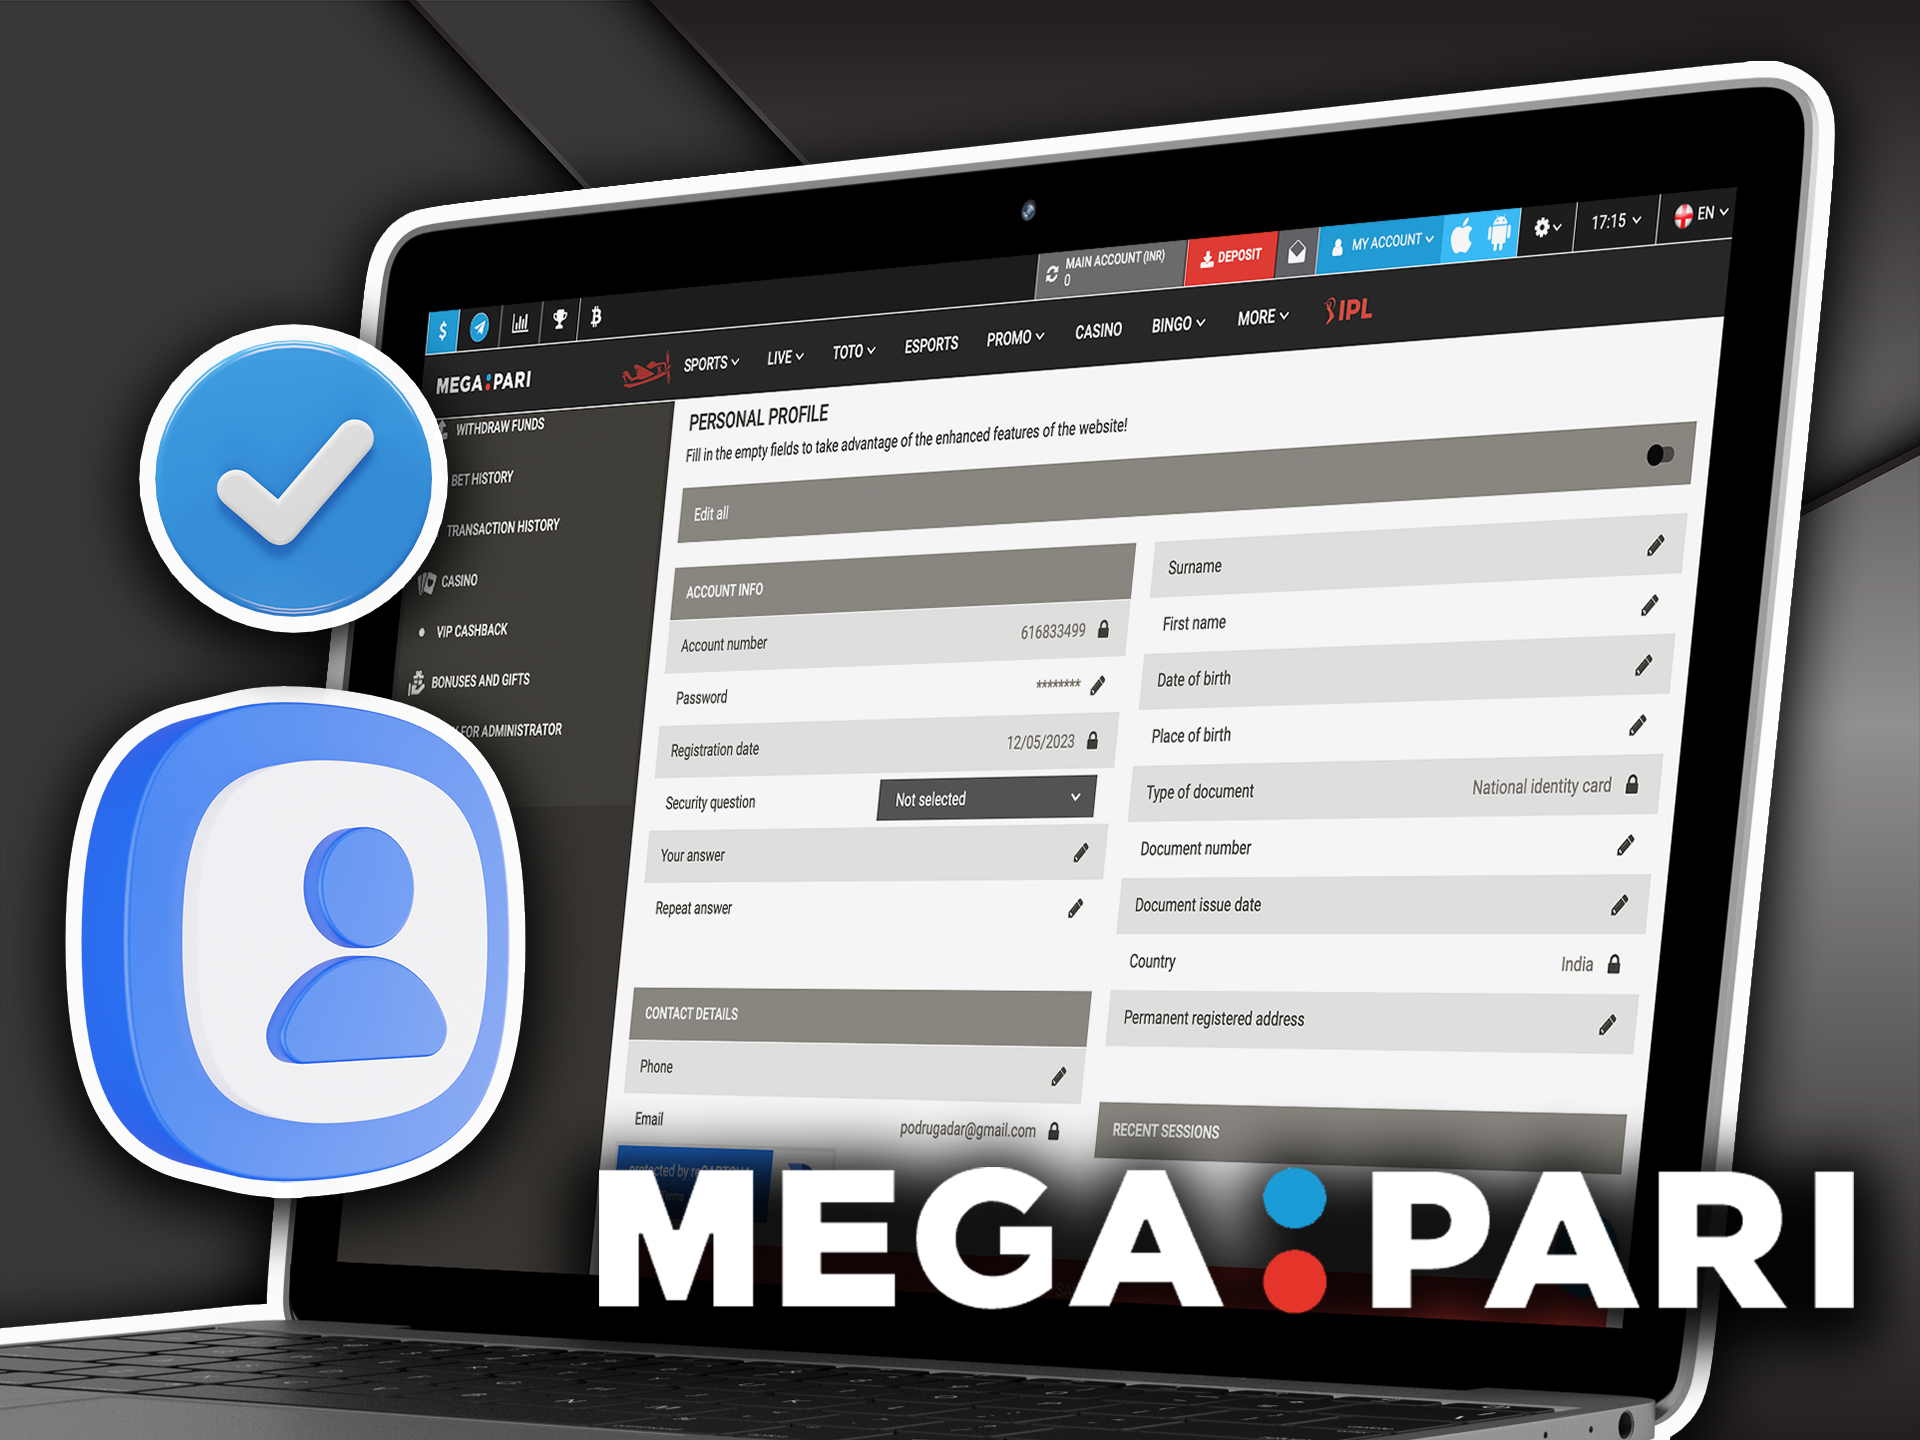 Verify your Megapari account by providing required data.